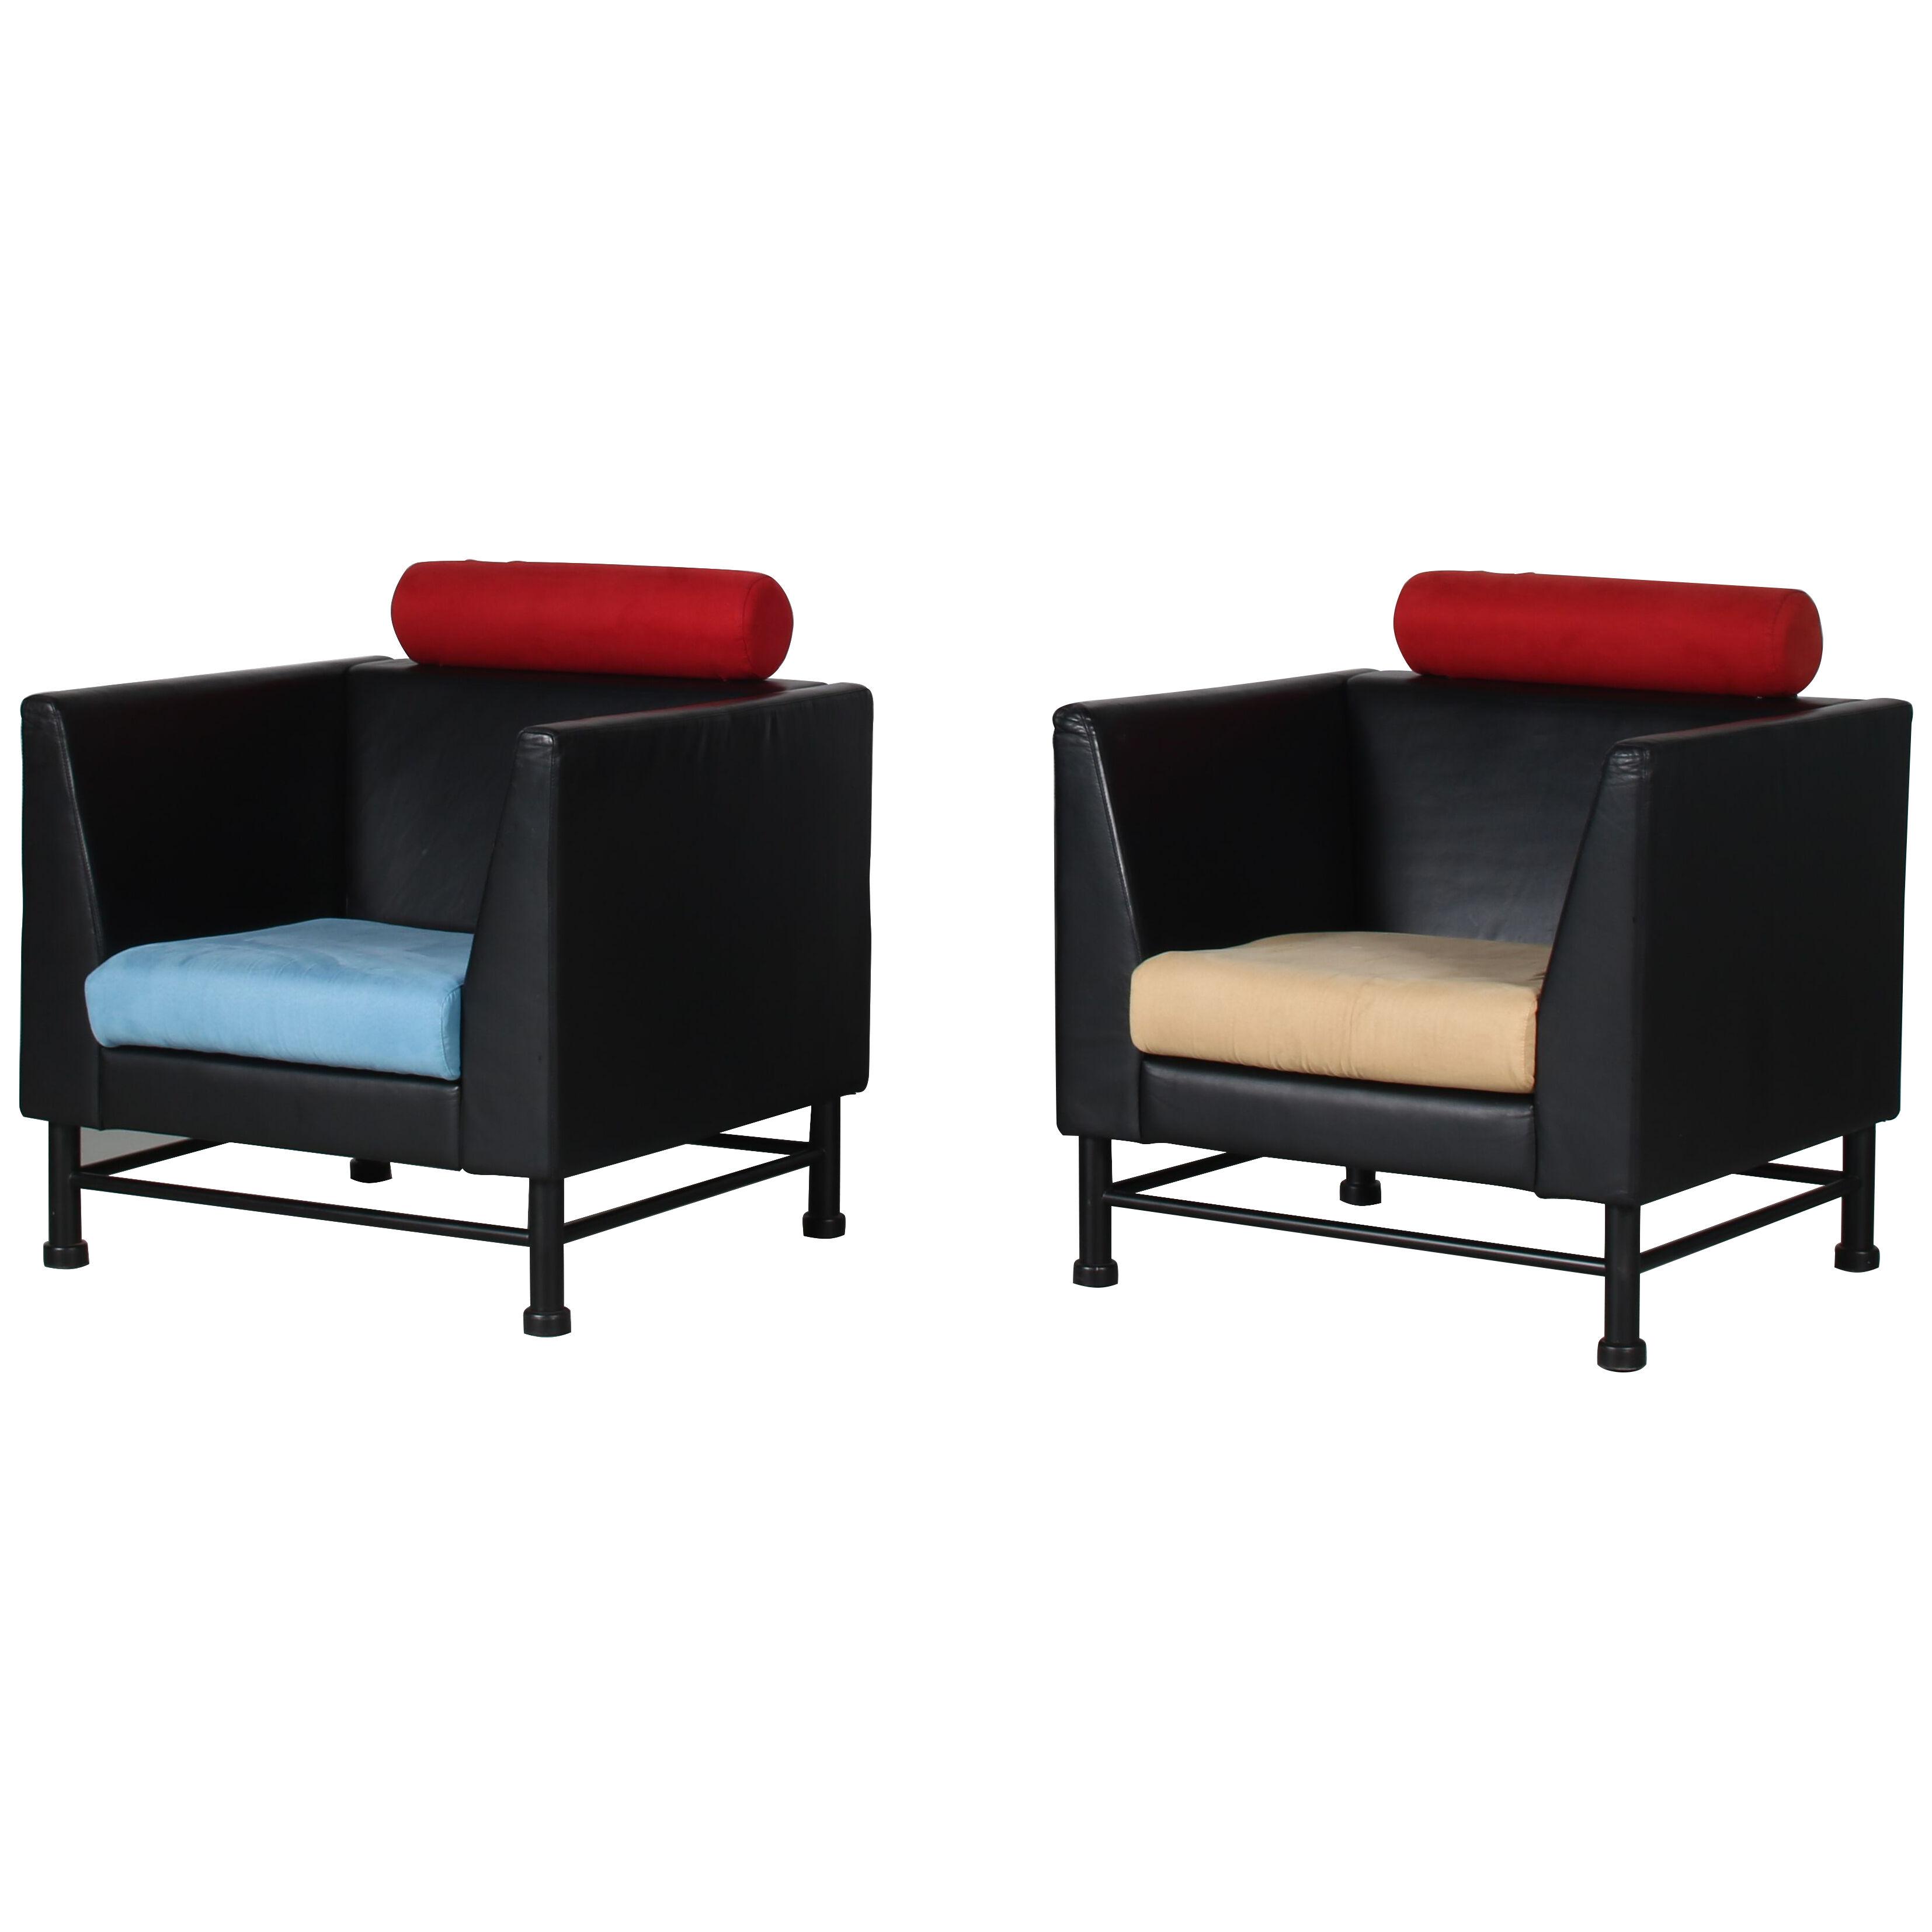 Pair of “East Side” Chairs by Ettore Sottsass for Knoll International, USA 1980